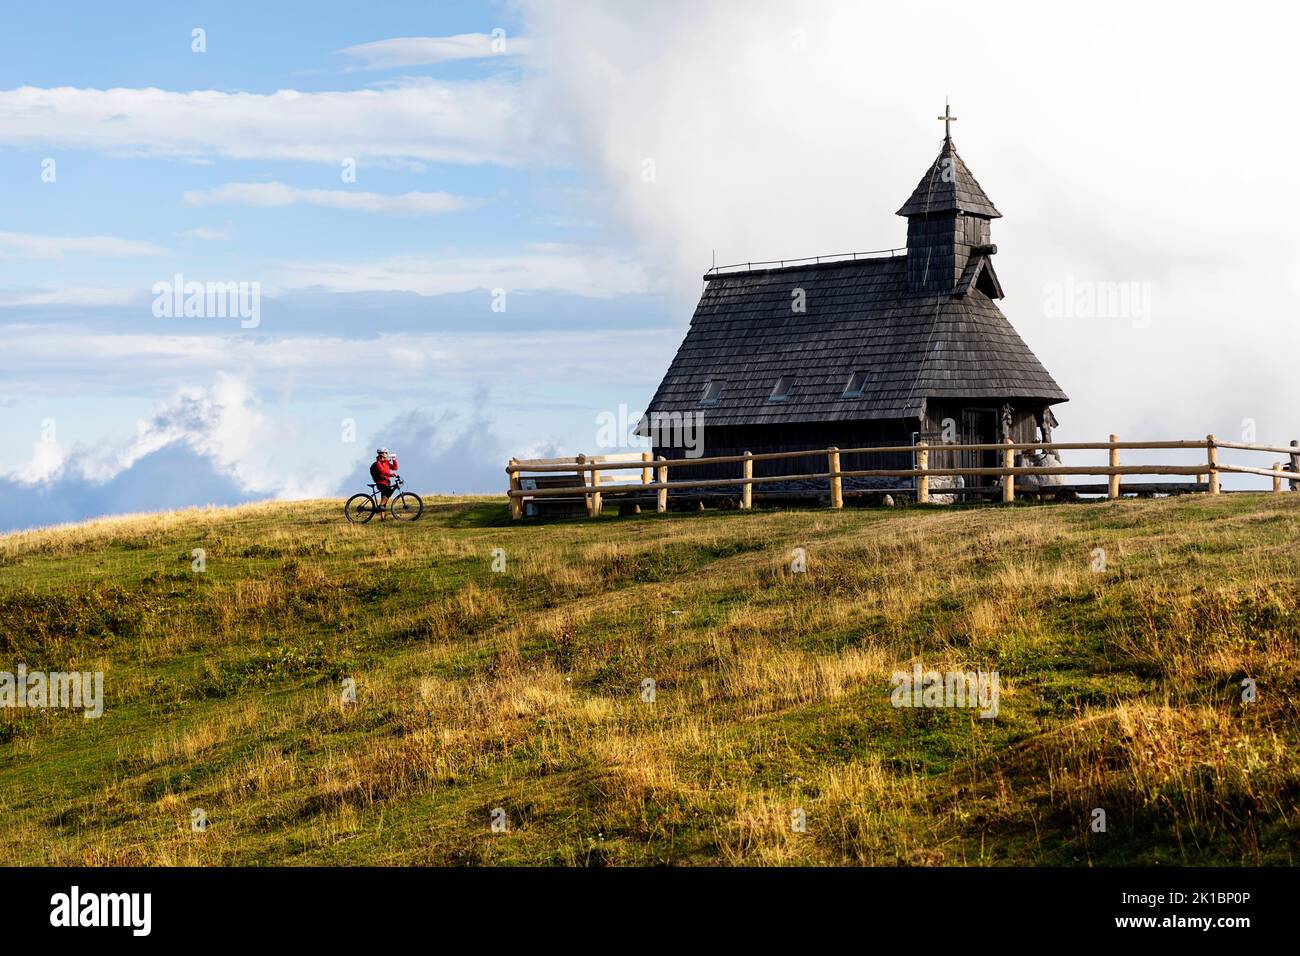 Woman tourist, cyclist on a trip to Chapel of Mary of the Snows located above shepherd's settlement on Velika planina alpine plateau, Kamnik, Slovenia Stock Photo